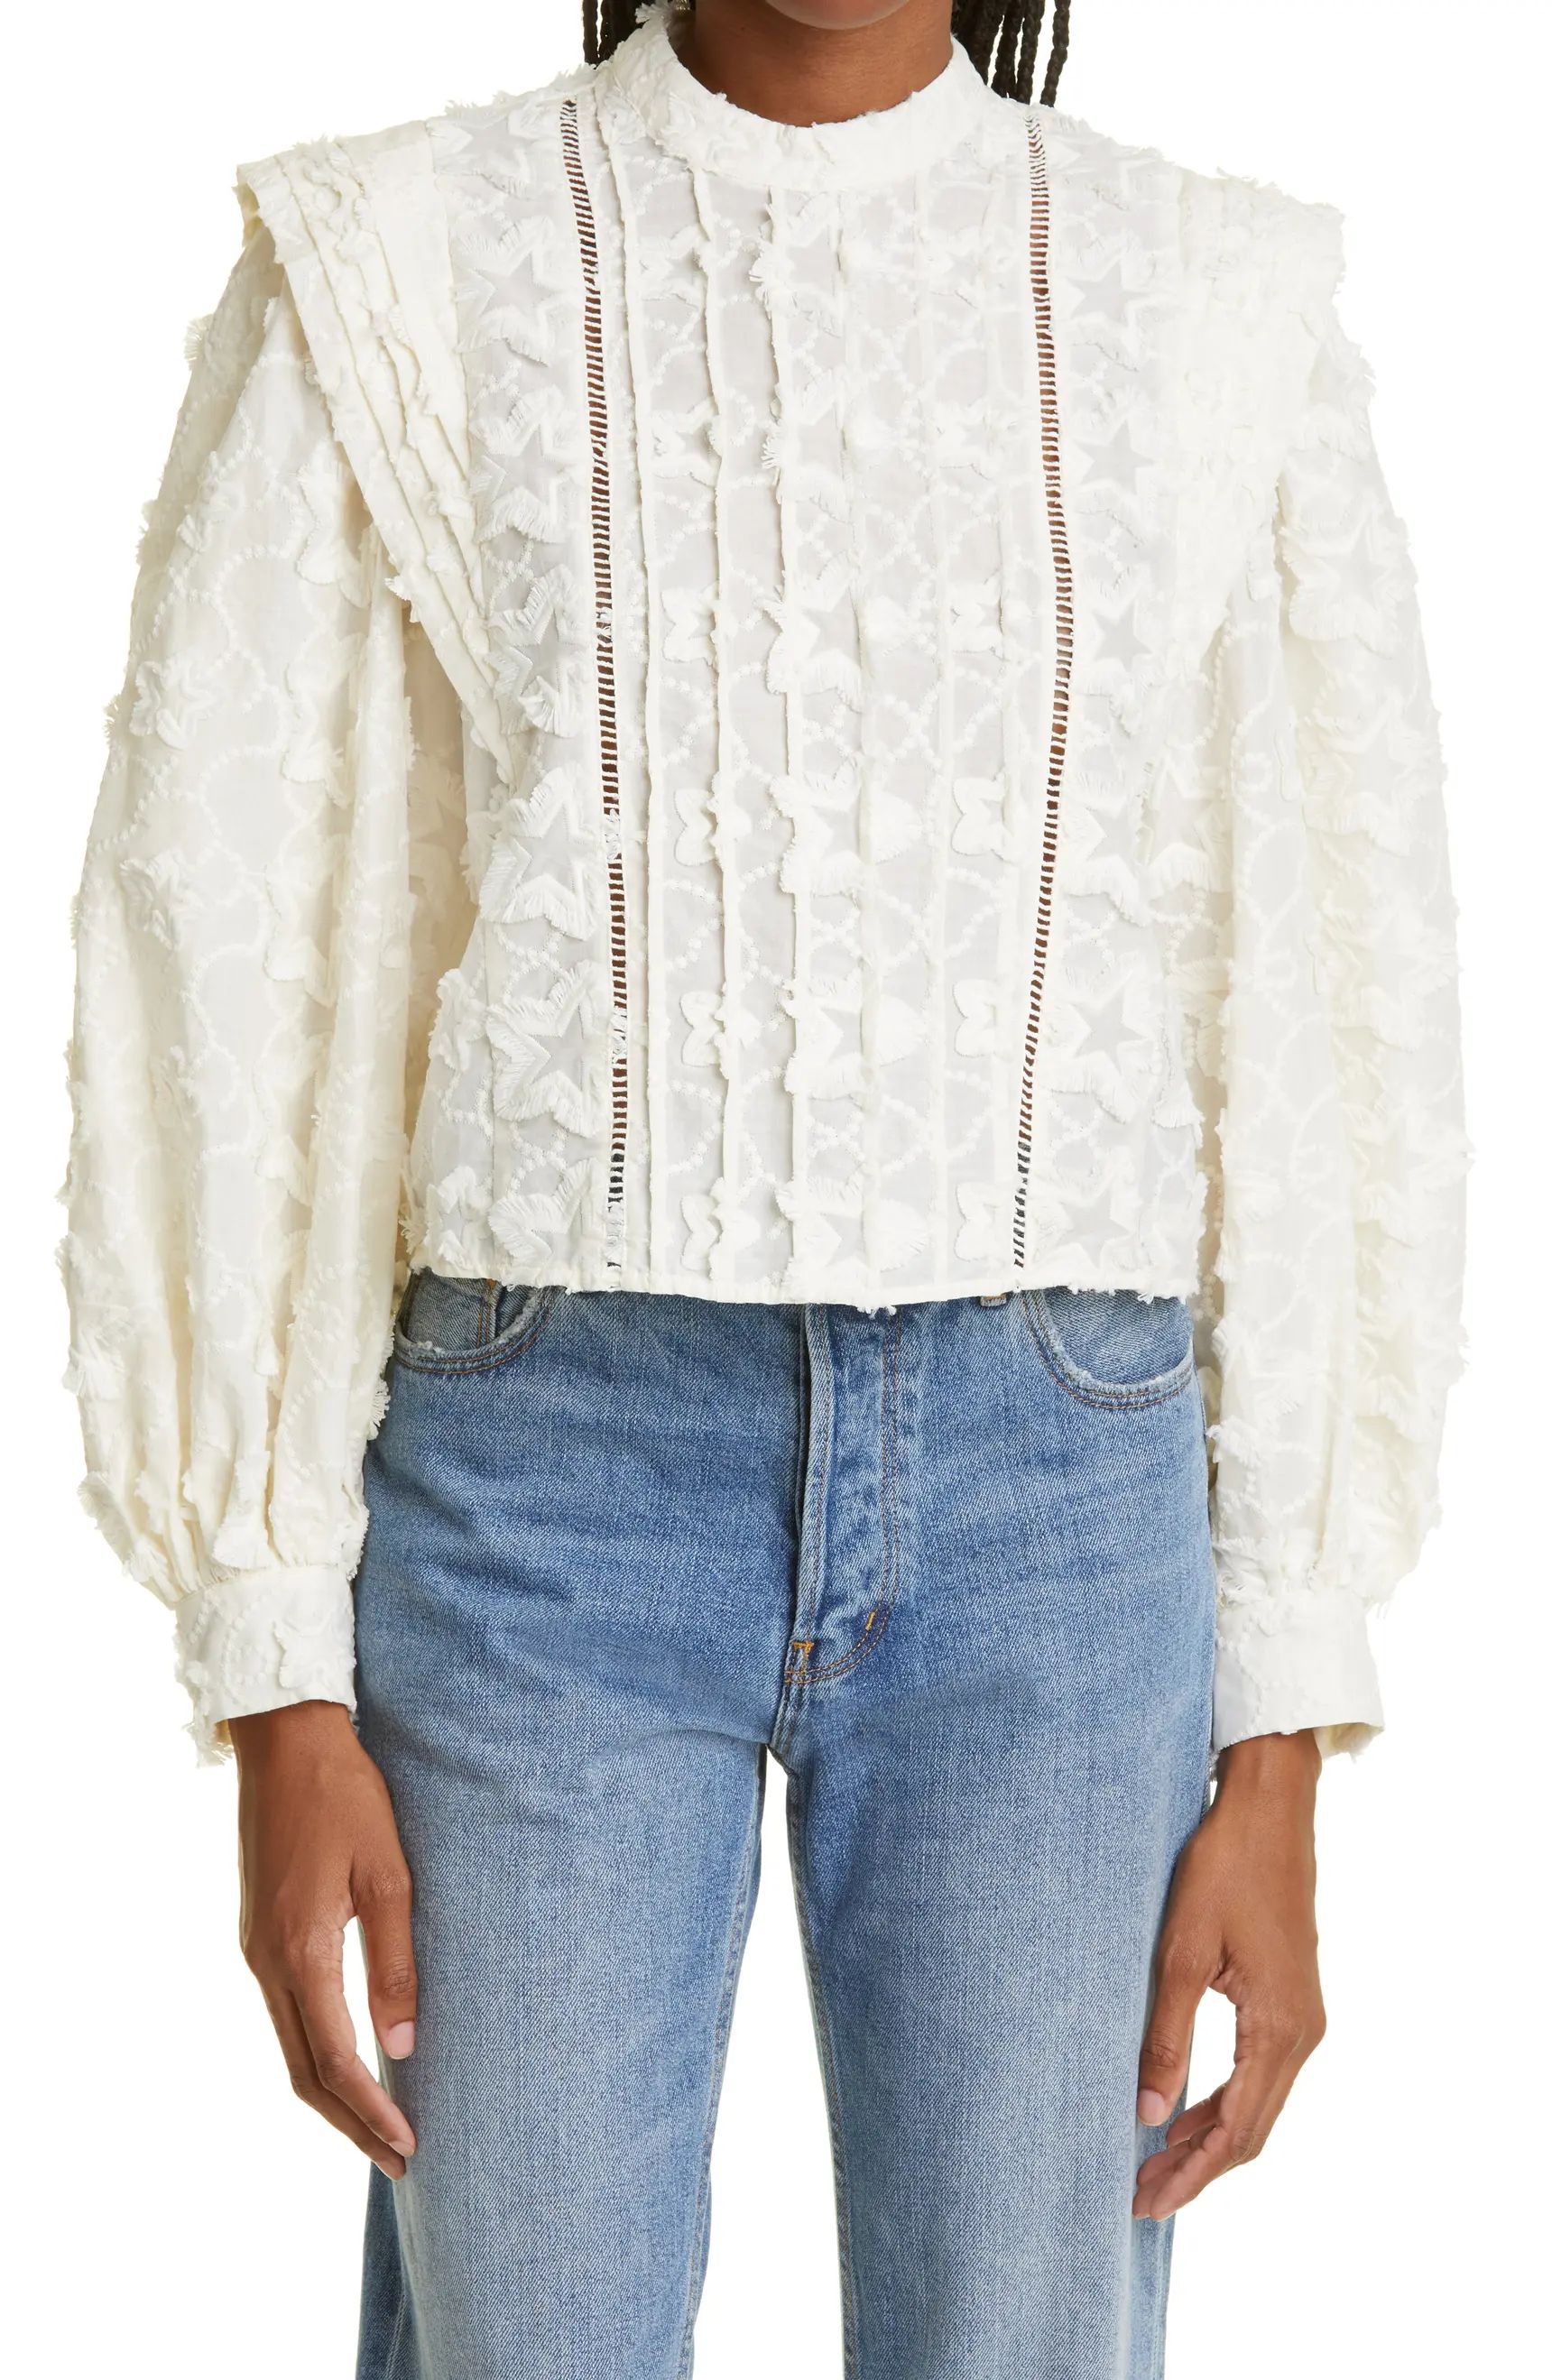 FARM Rio Star 3D Embroidered Blouse | Nordstrom | Nordstrom